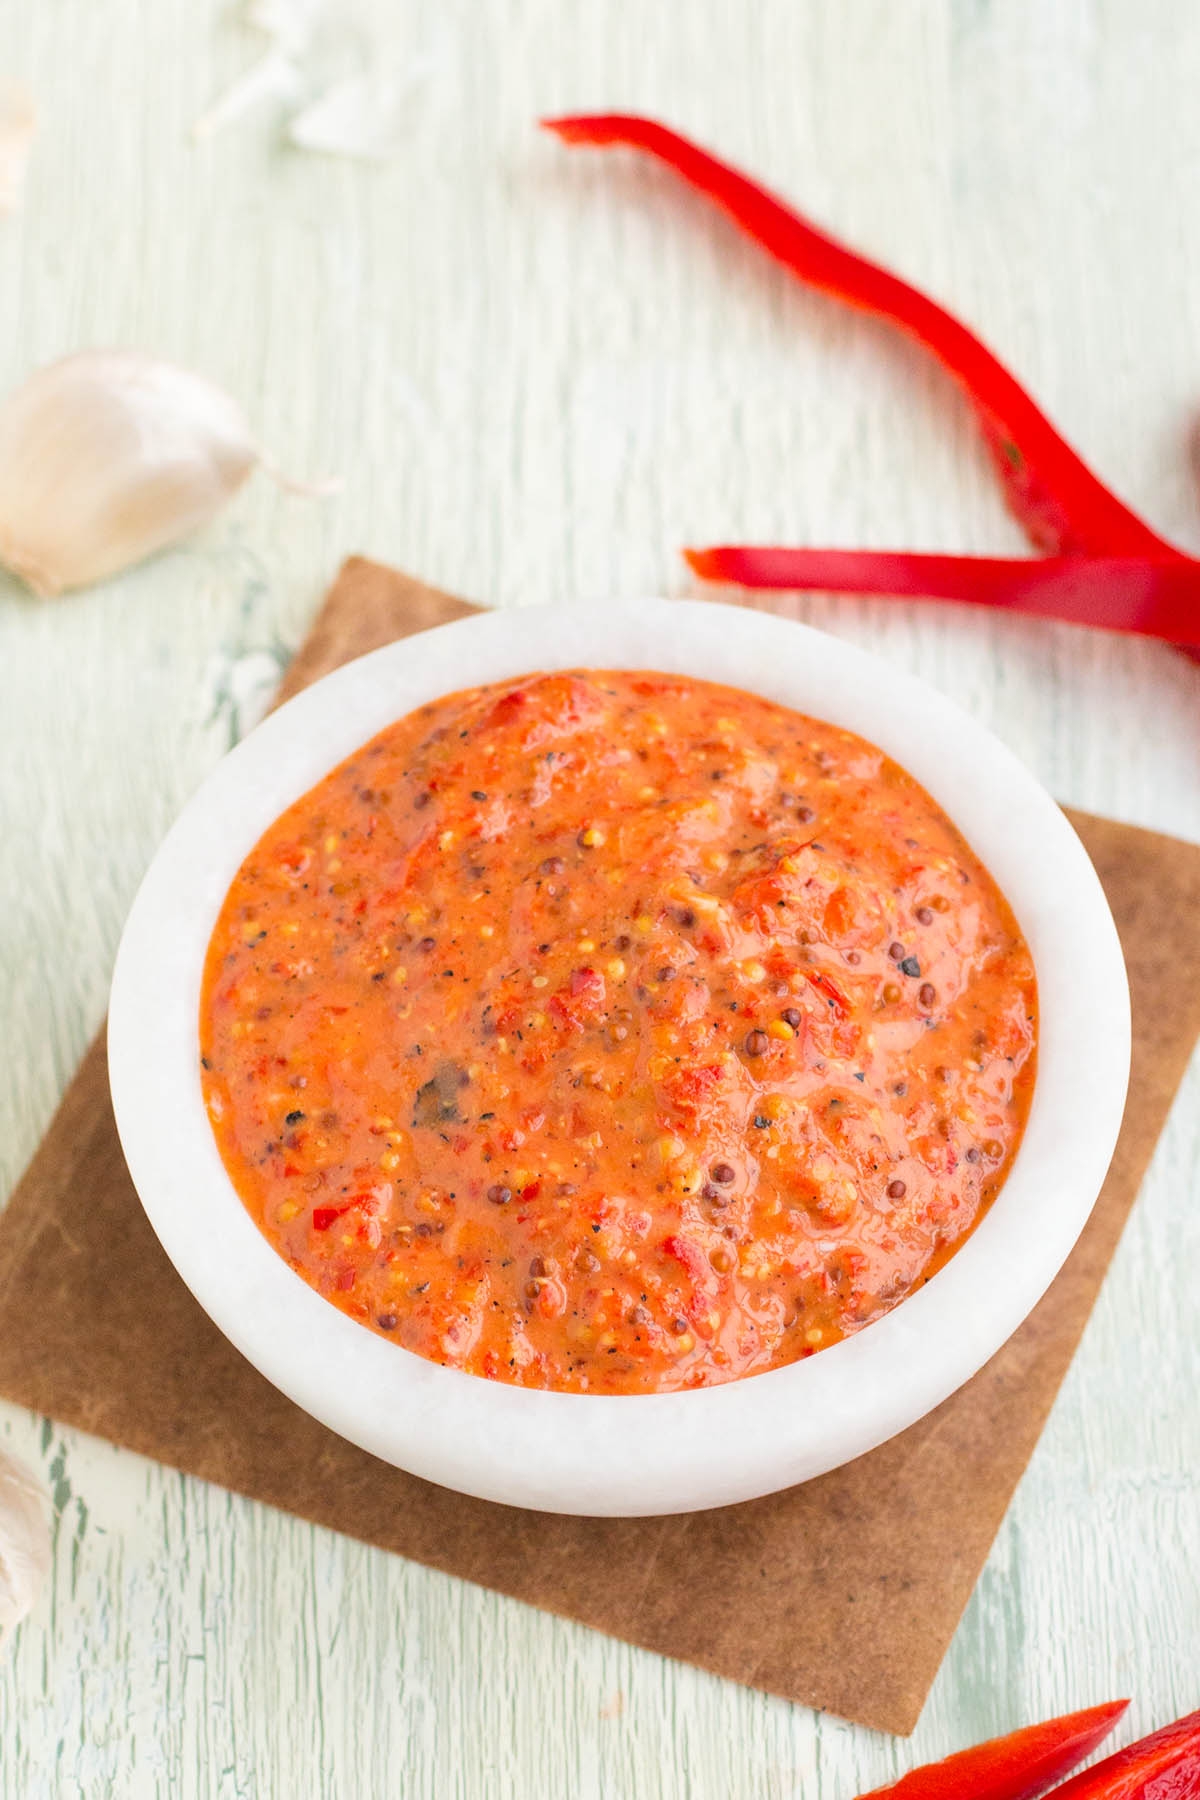 Roasted Red Pepper Remoulade looking extremely delicious and inviting